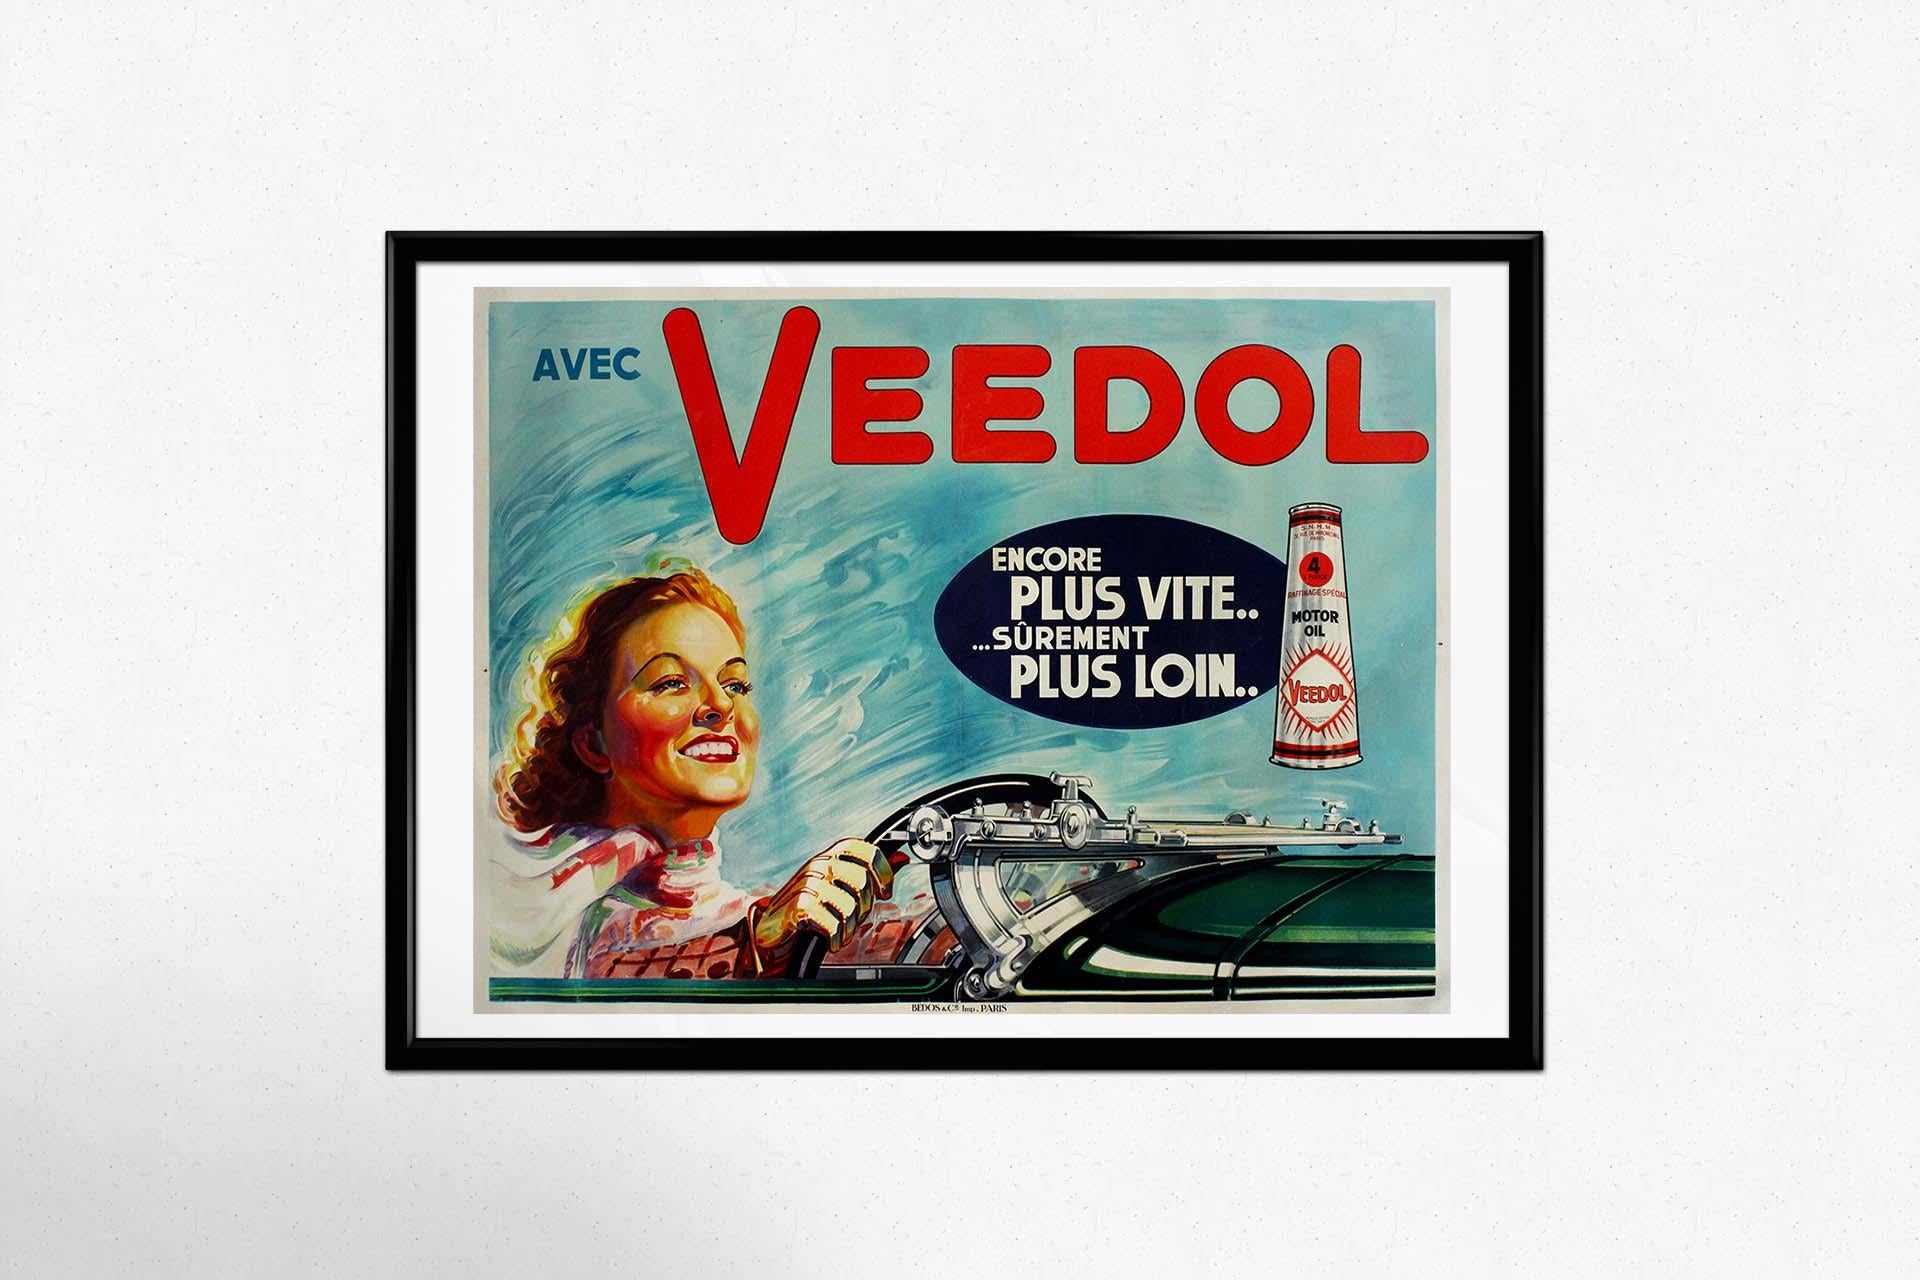 The original advertising poster for Veedol, with the slogan 